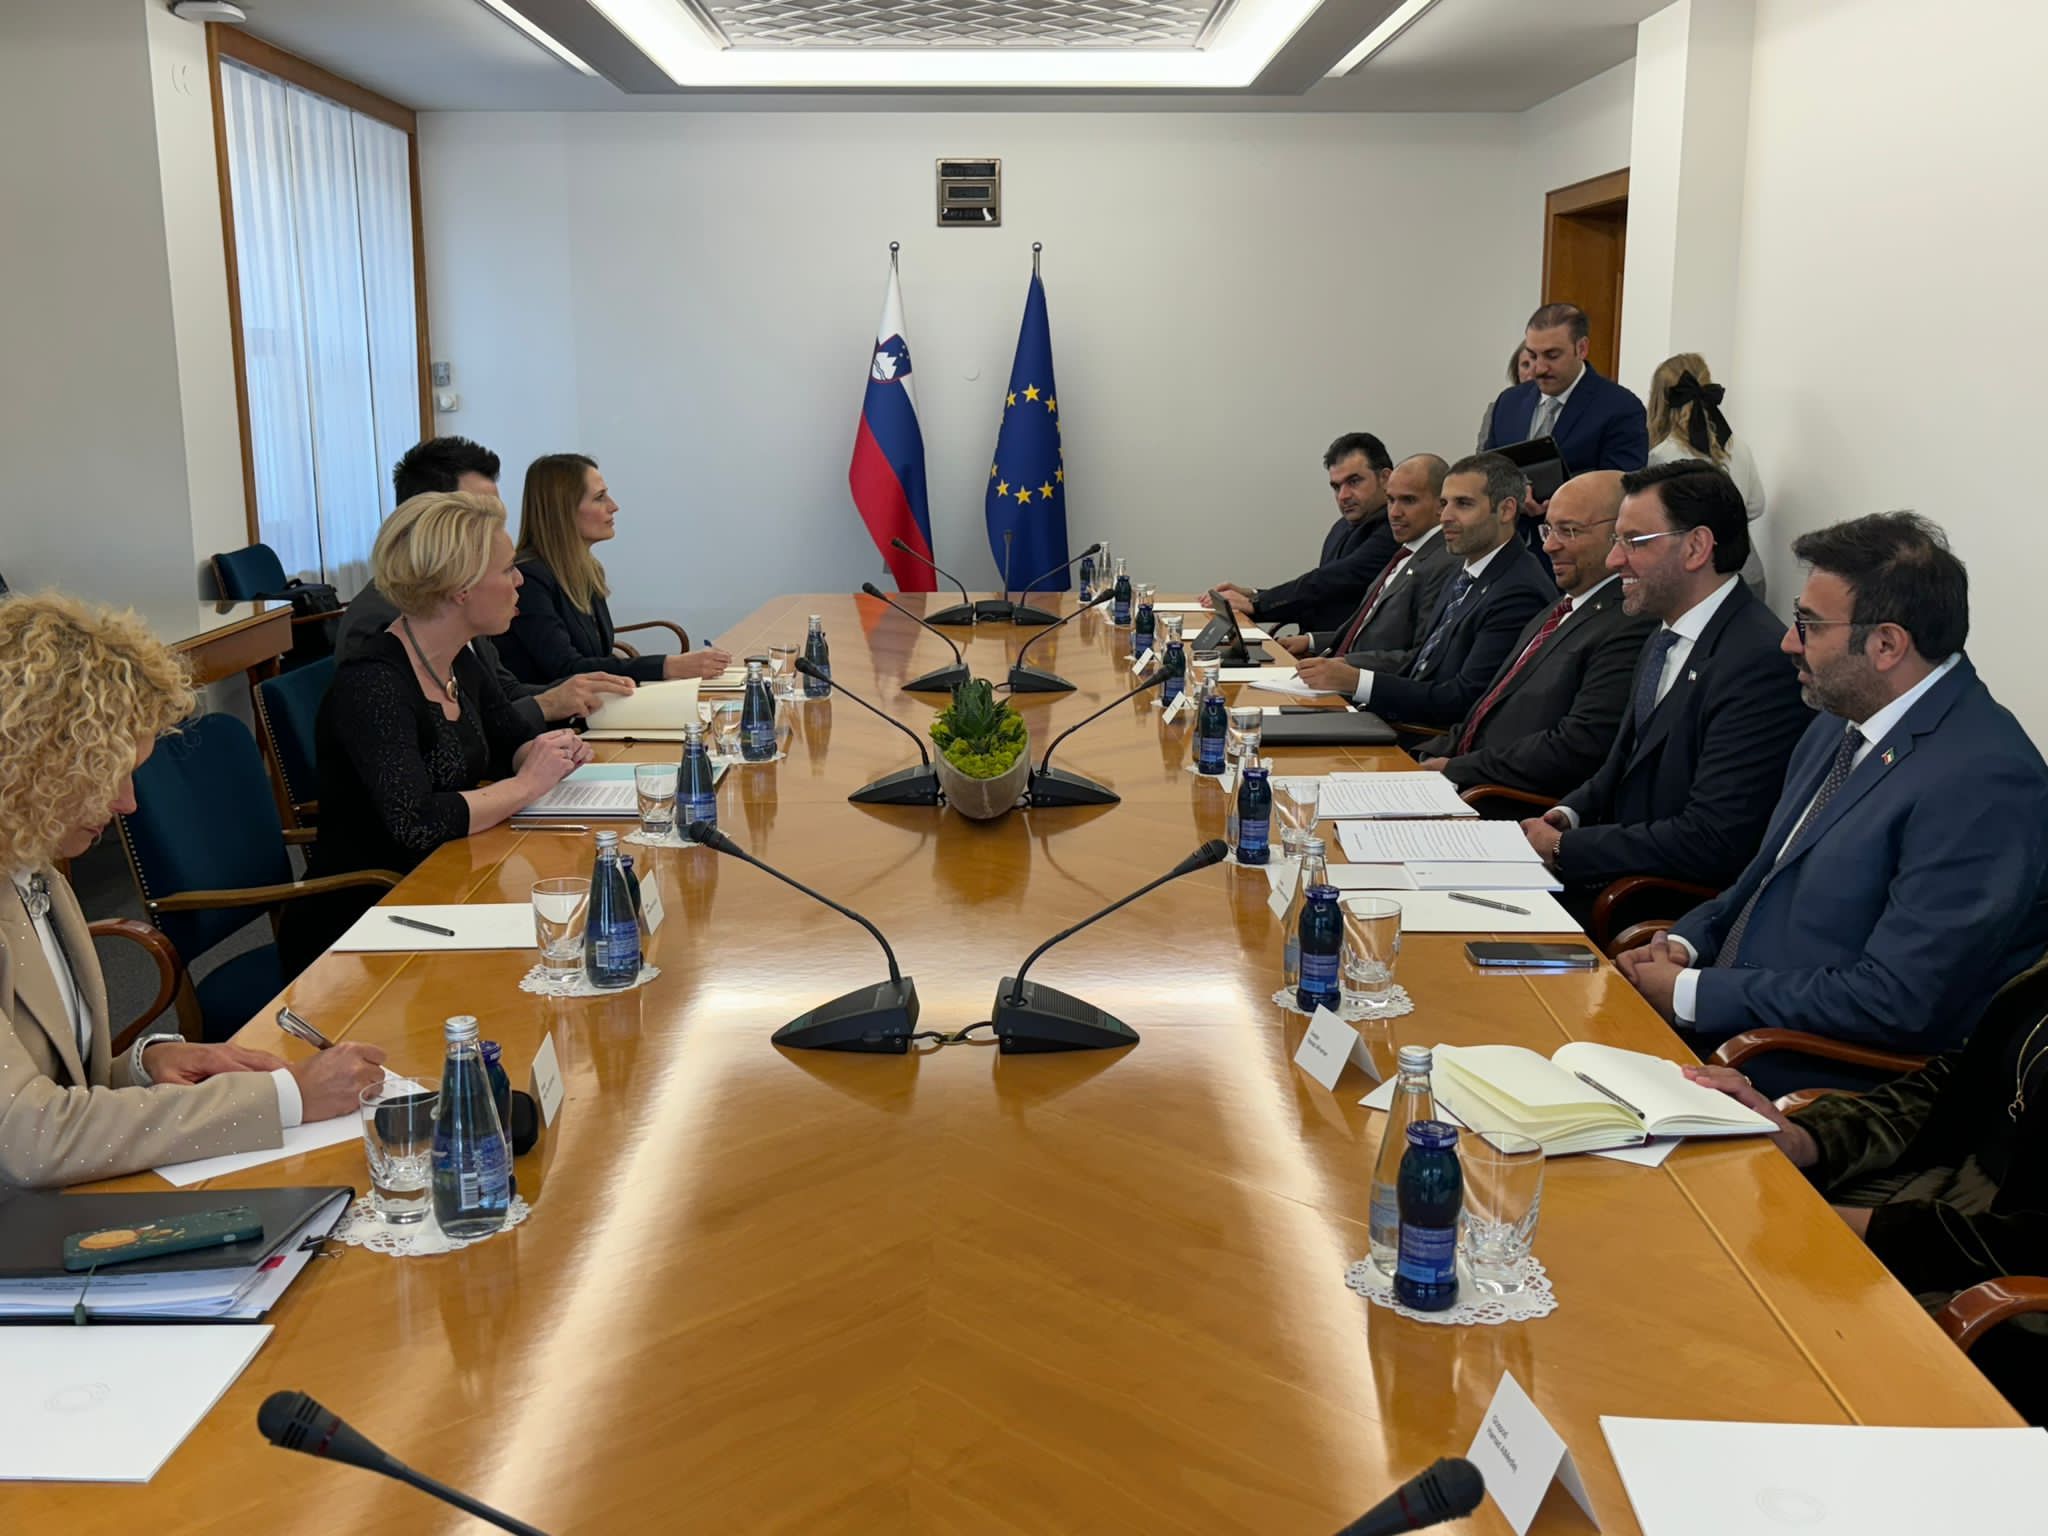 During a session, the Speaker of the Slovenian Parliament, Urska Klakochar along with Head of the Kuwaiti Parliamentary Friendship 5th Committee delegation Member of Parliament (MP) Osama Al-Zaid